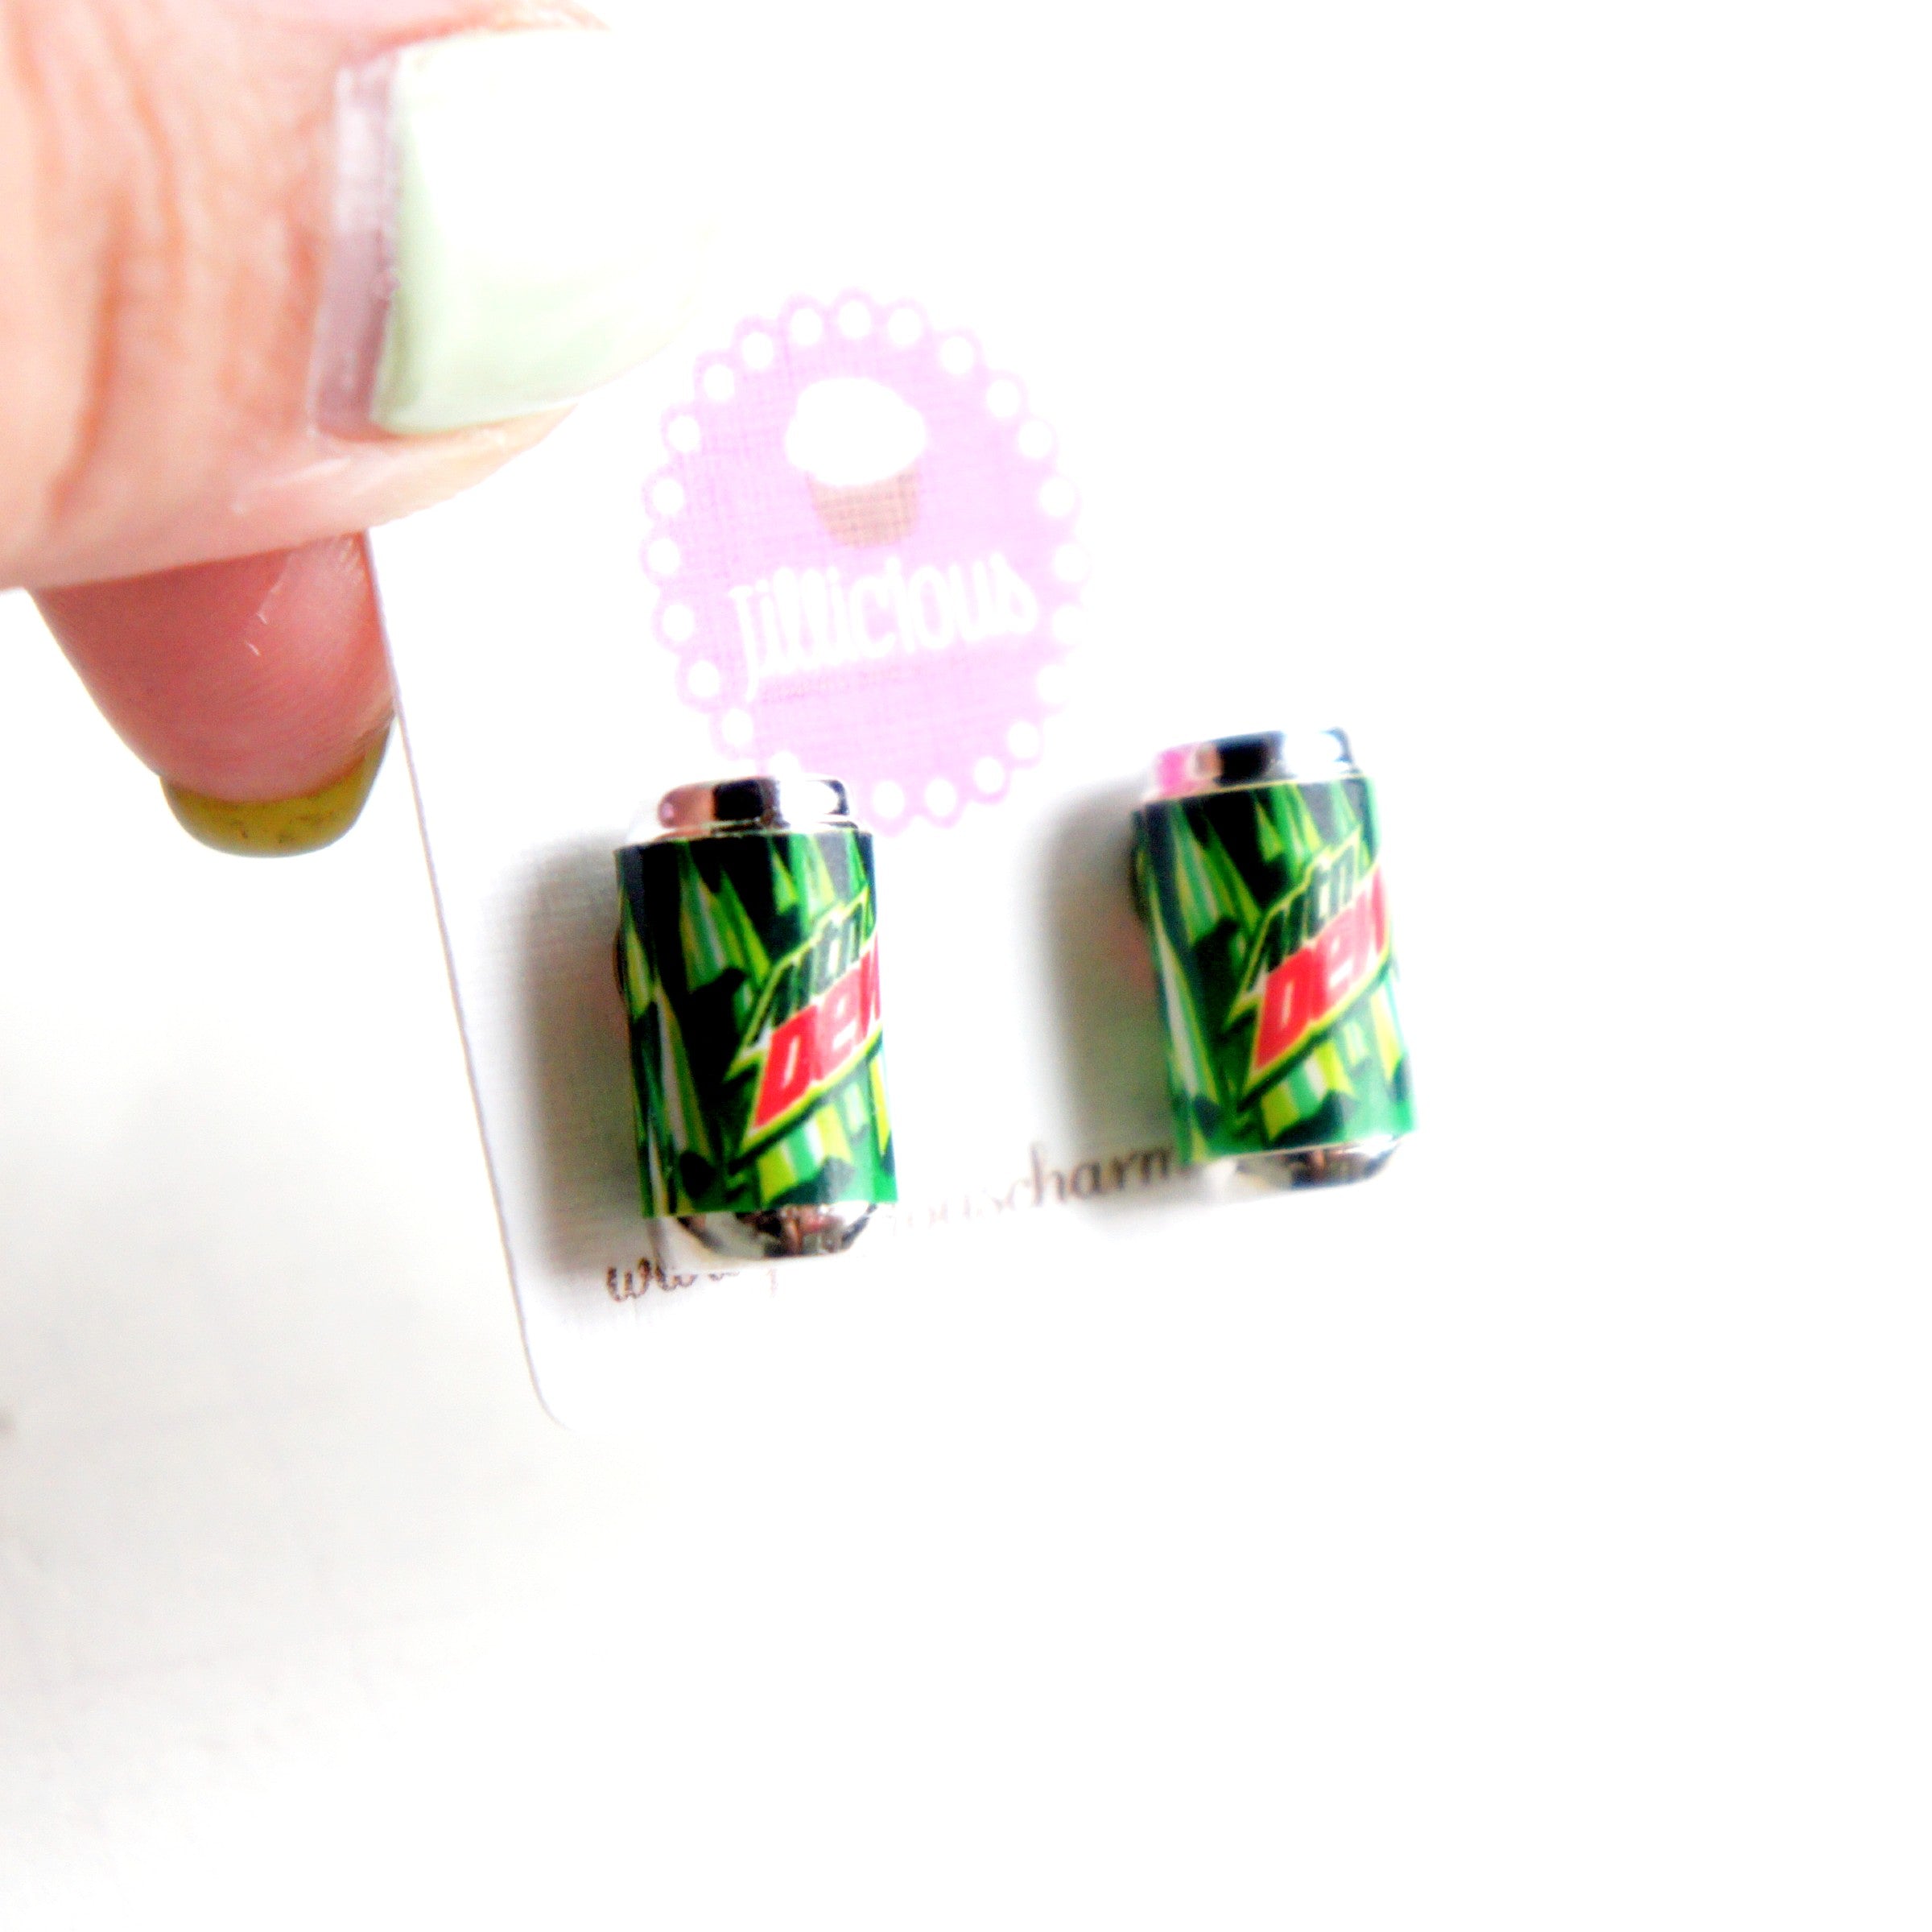 Mountain Dew Soda Can Earrings - Jillicious charms and accessories